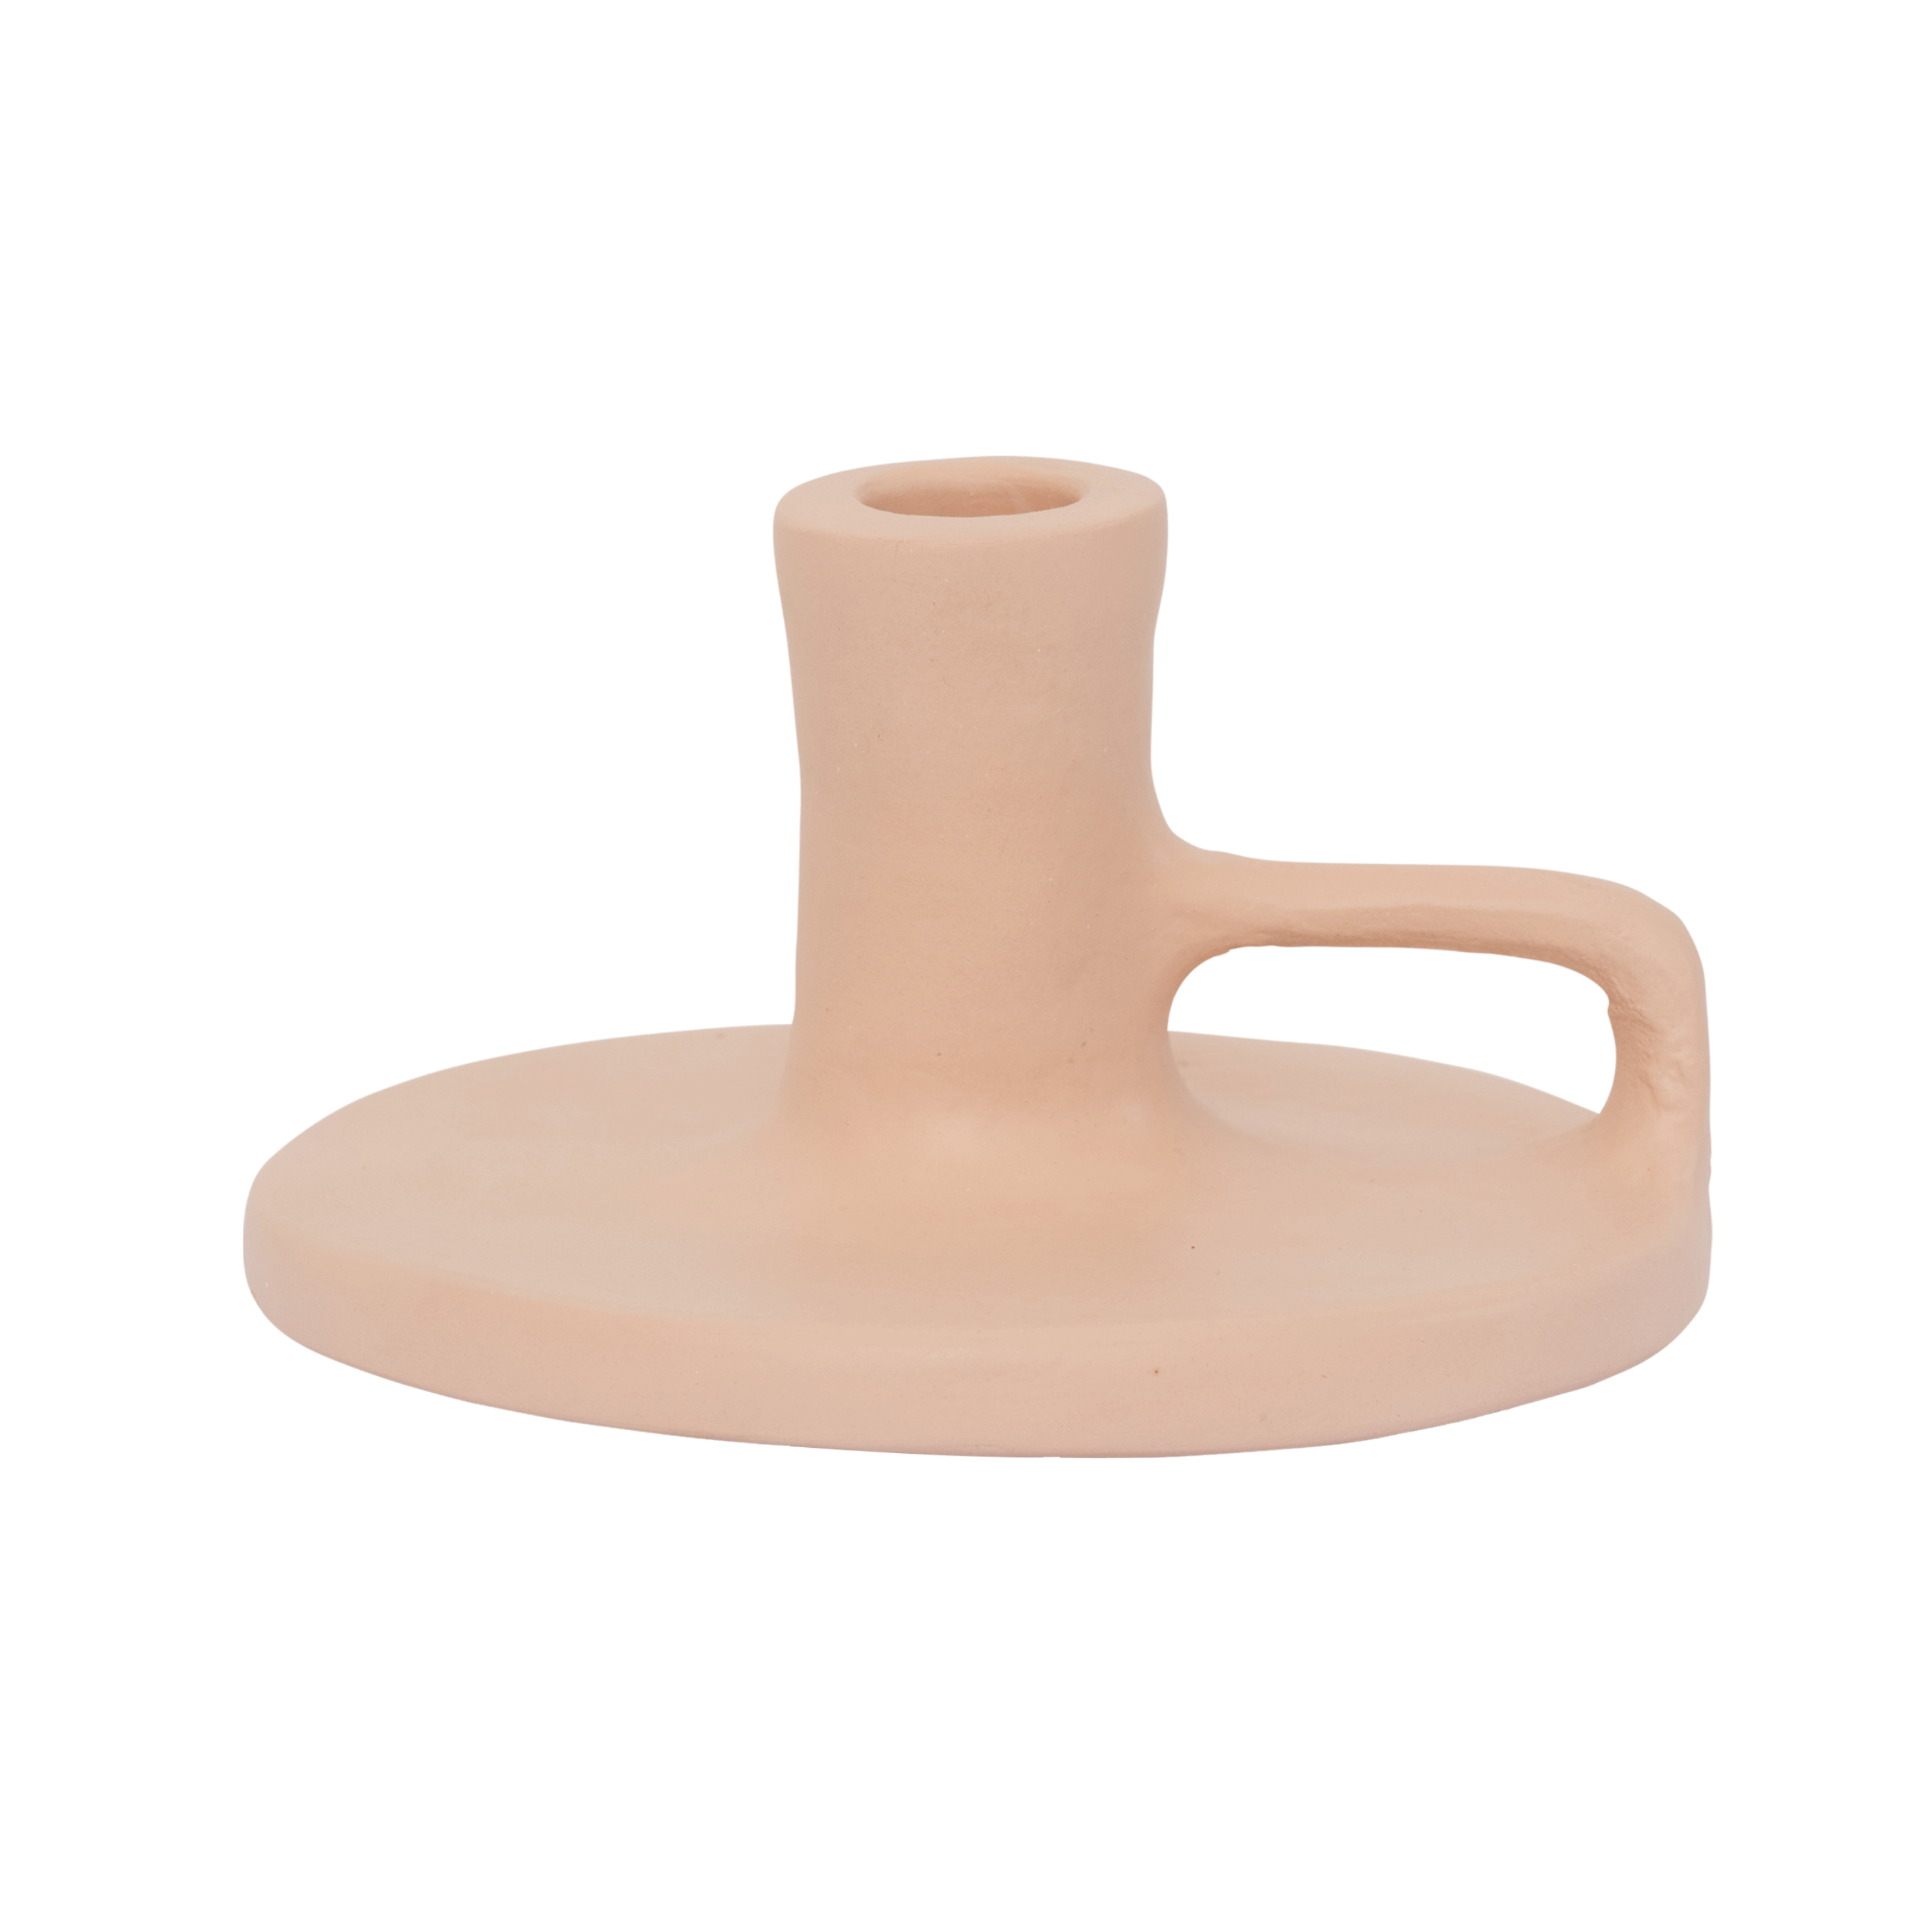 Unc Candle Holder Ecomix Legerro Peach Wip Gift